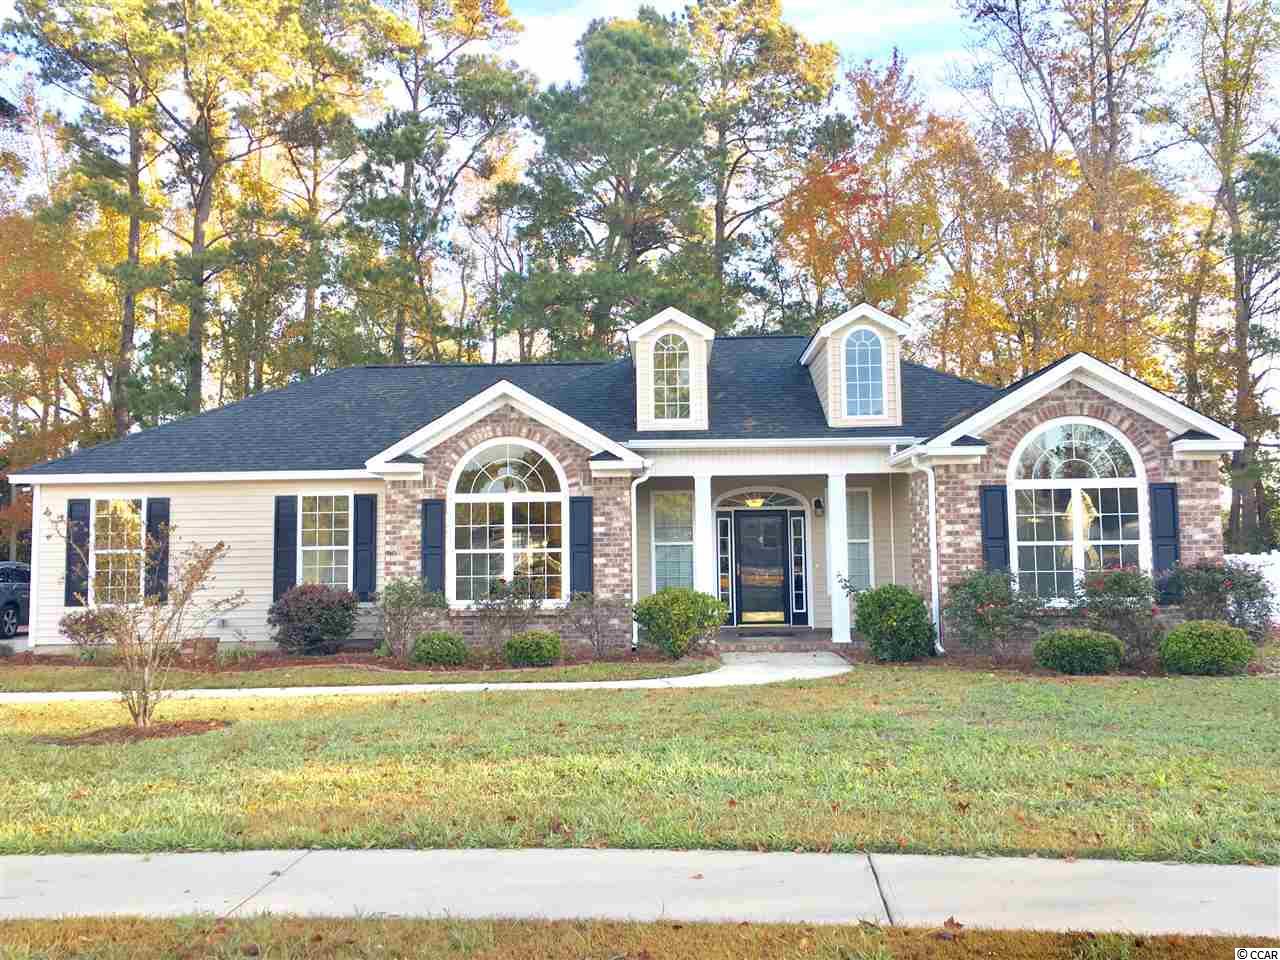 174 Kellys Cove Dr. Conway, SC 29526